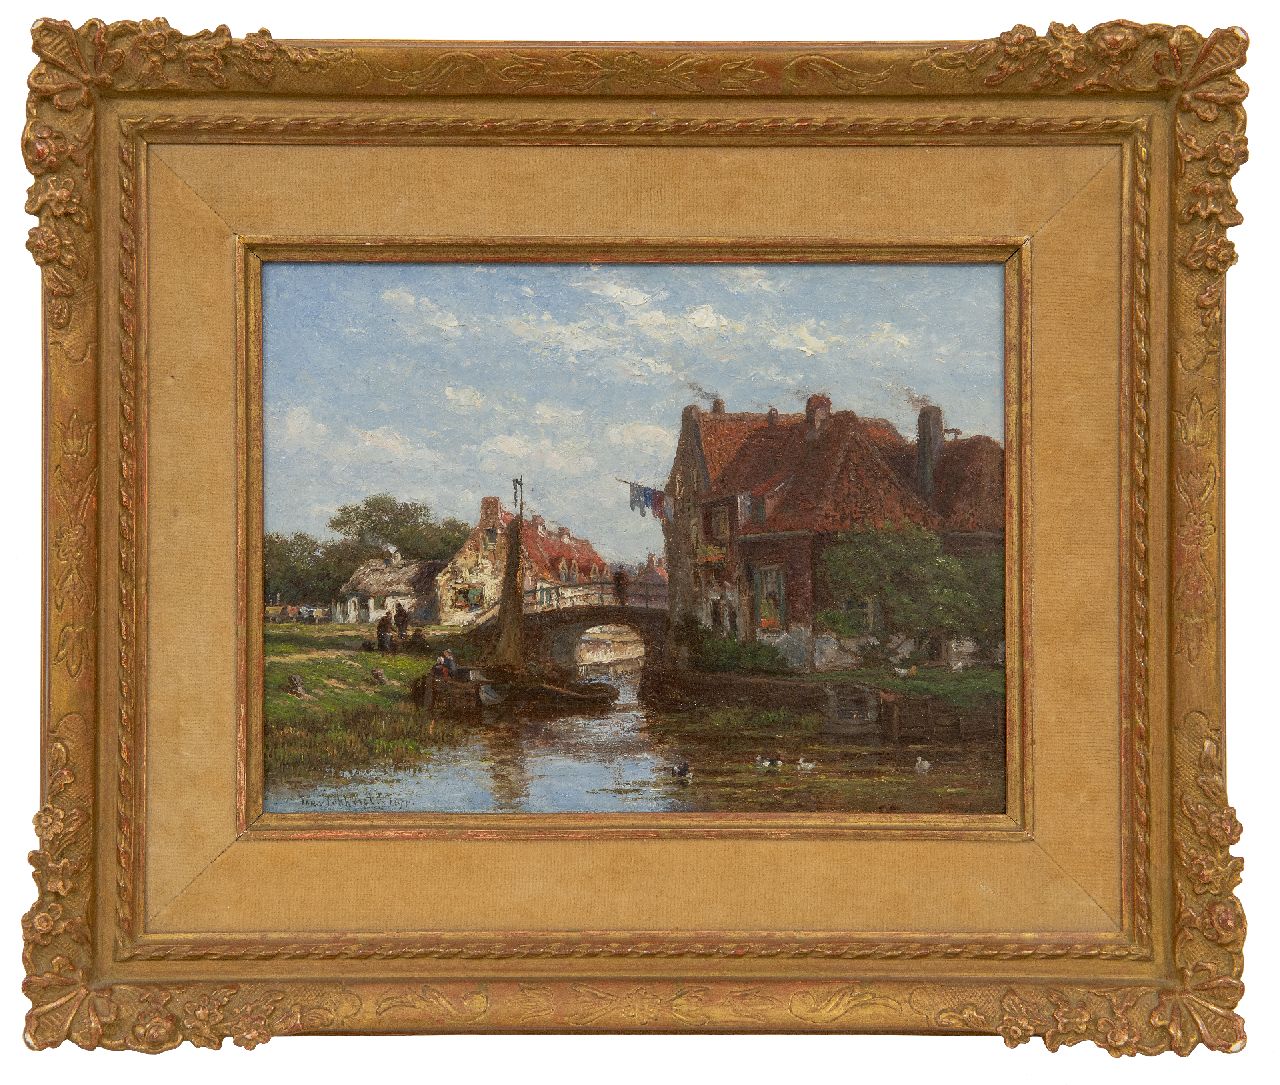 Lokhorst J.N. van | Johan Nicolaas 'Jan' van Lokhorst | Paintings offered for sale | A village stream with moored vessels, oil on panel 17.9 x 23.9 cm, signed l.l. and dated 1870